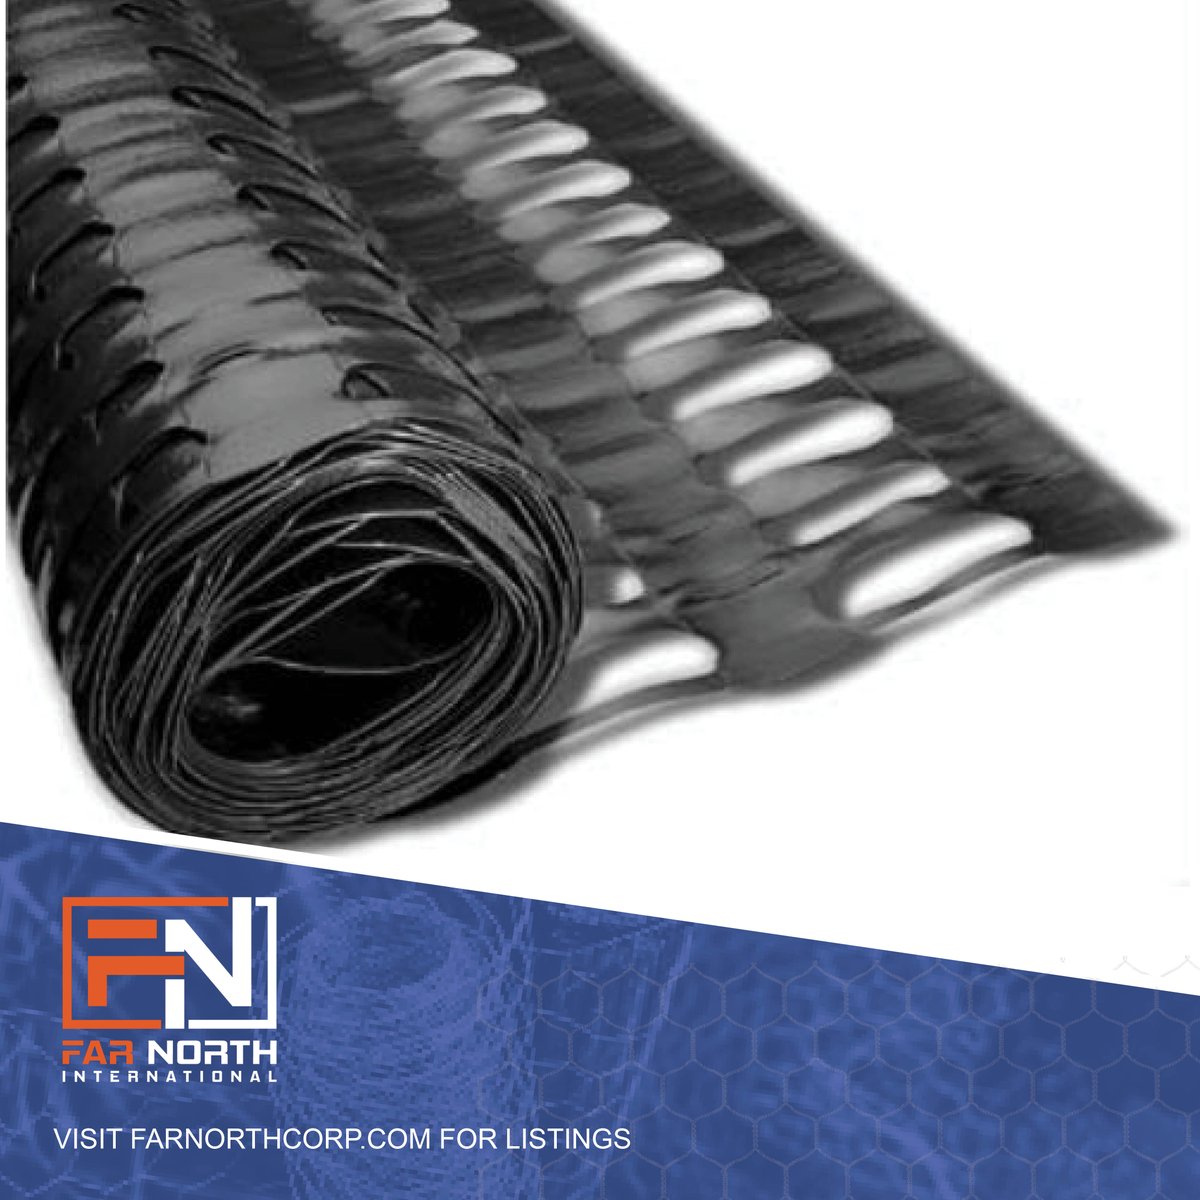 December is next week which means more snow is right around the corner! ❄️ Order our Nordic Plus II Snow Fence to ensure the heavy snow doesn't power through your fenced-in property.

farnorthcorp.com
#FarNorthInternational #November #SnowFence #NordicPlus